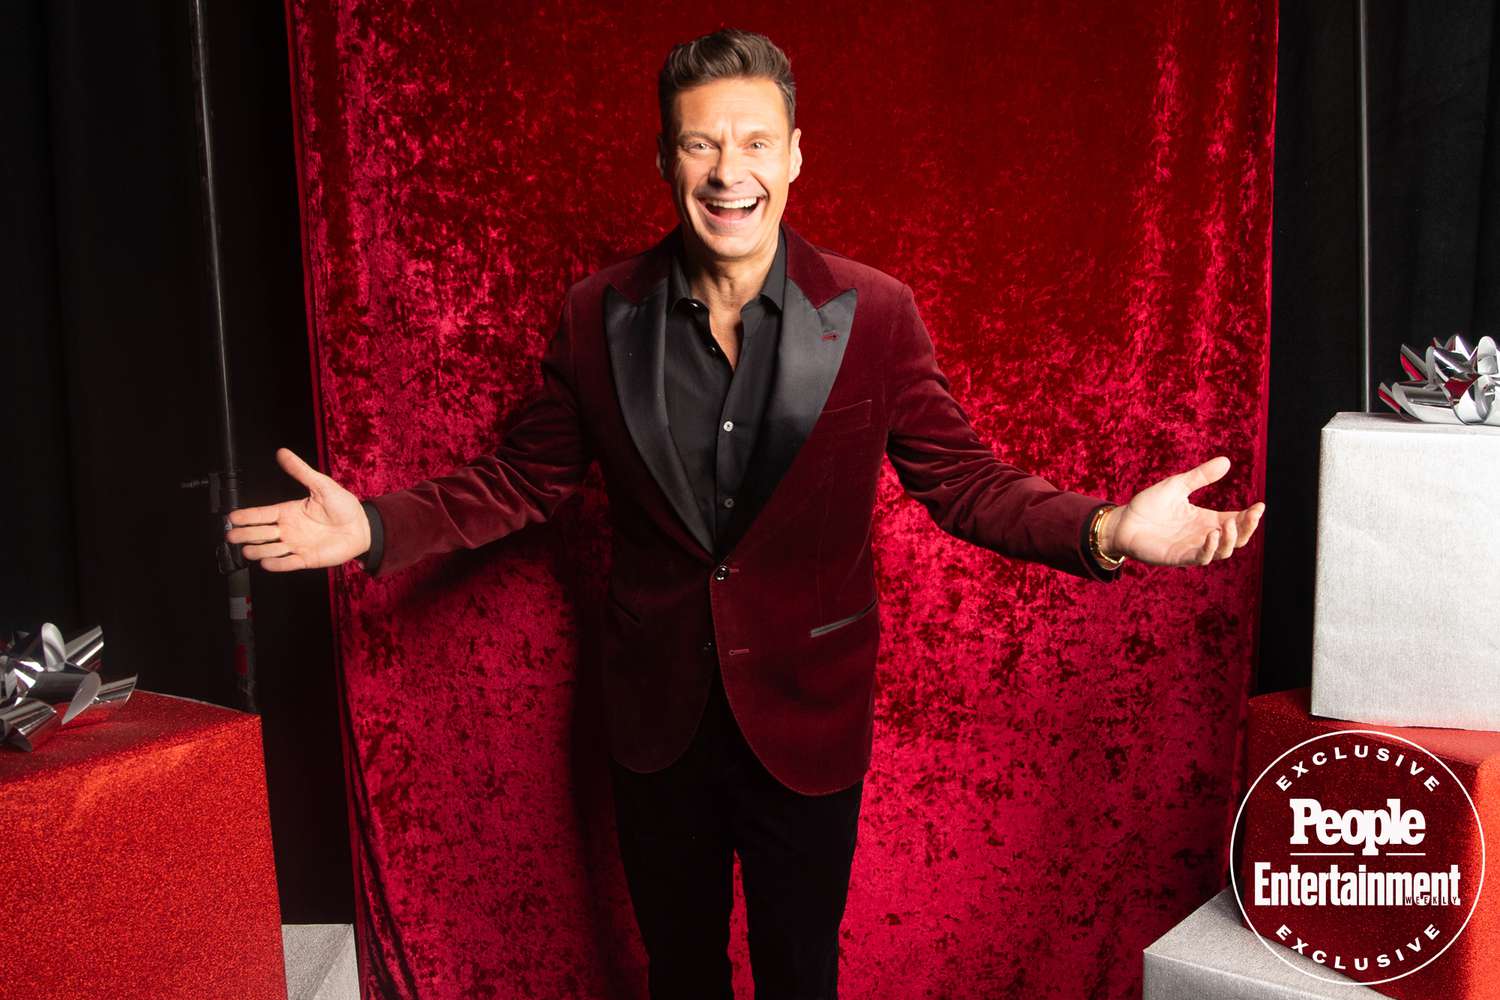 Ryan Seacrest photographed in the 2023 PEOPLE and Entertainment Weekly Jingle Ball portrait studio